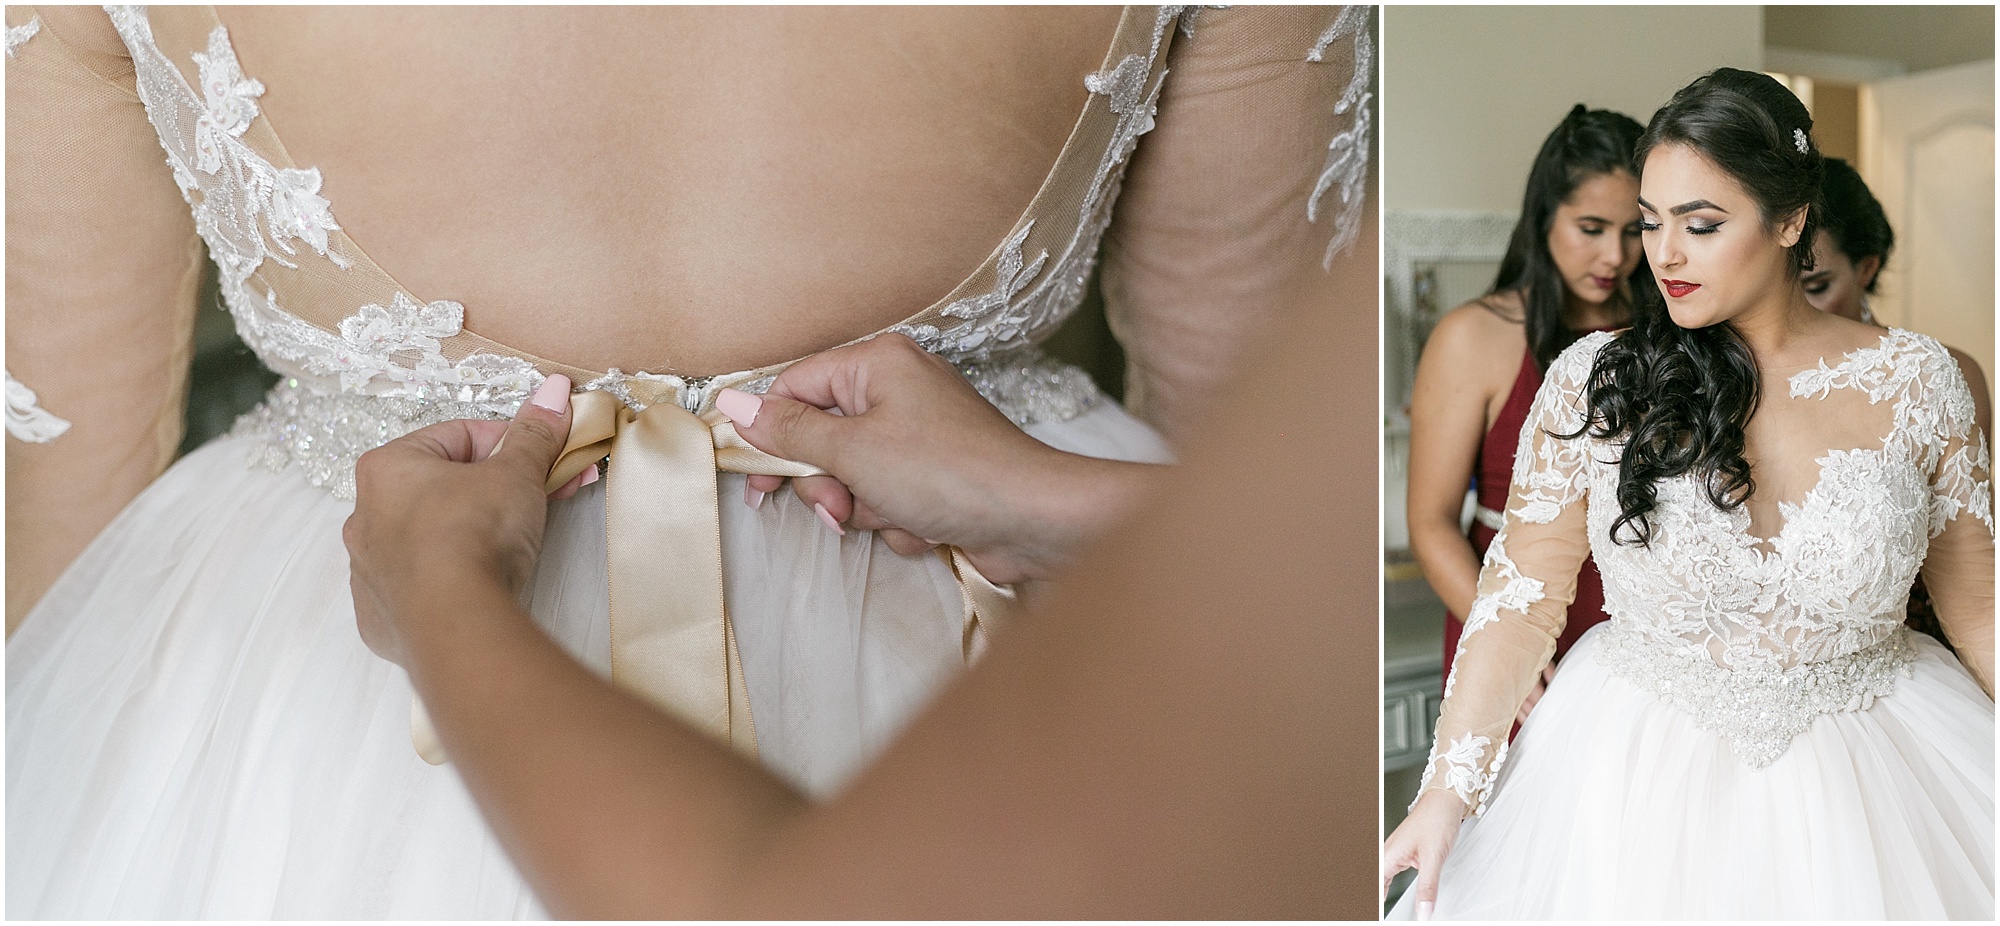 Tying the belt onto the back of the wedding dress. 